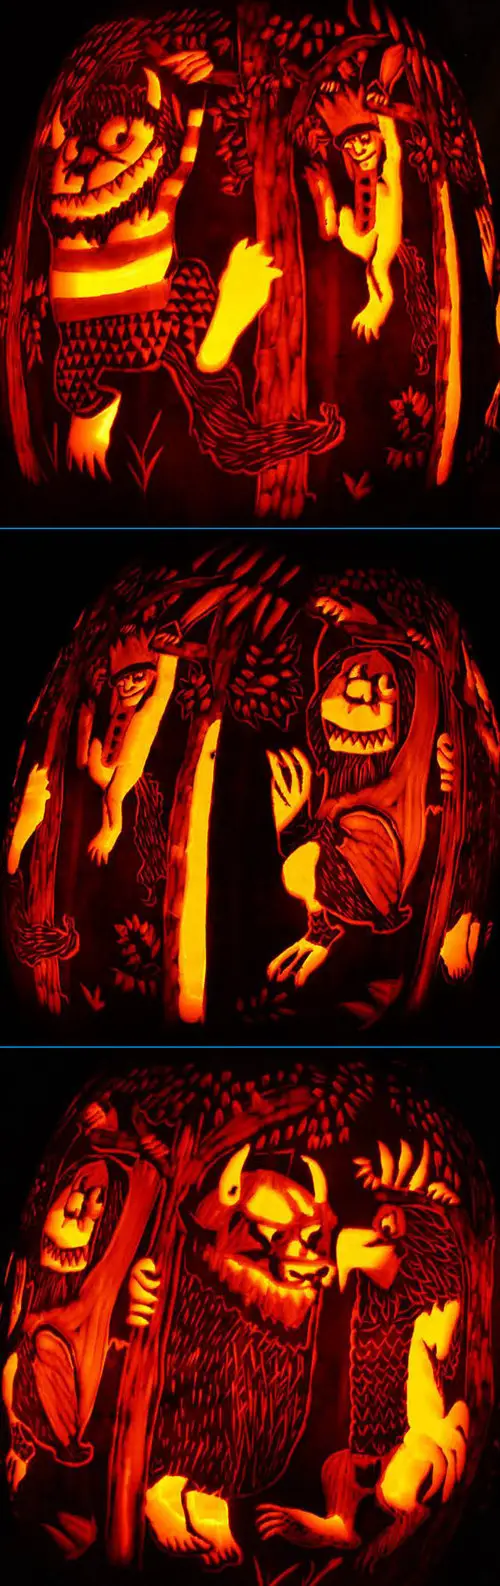 Funny Picture - Where the Wild Things Are Jack-O-Lantern